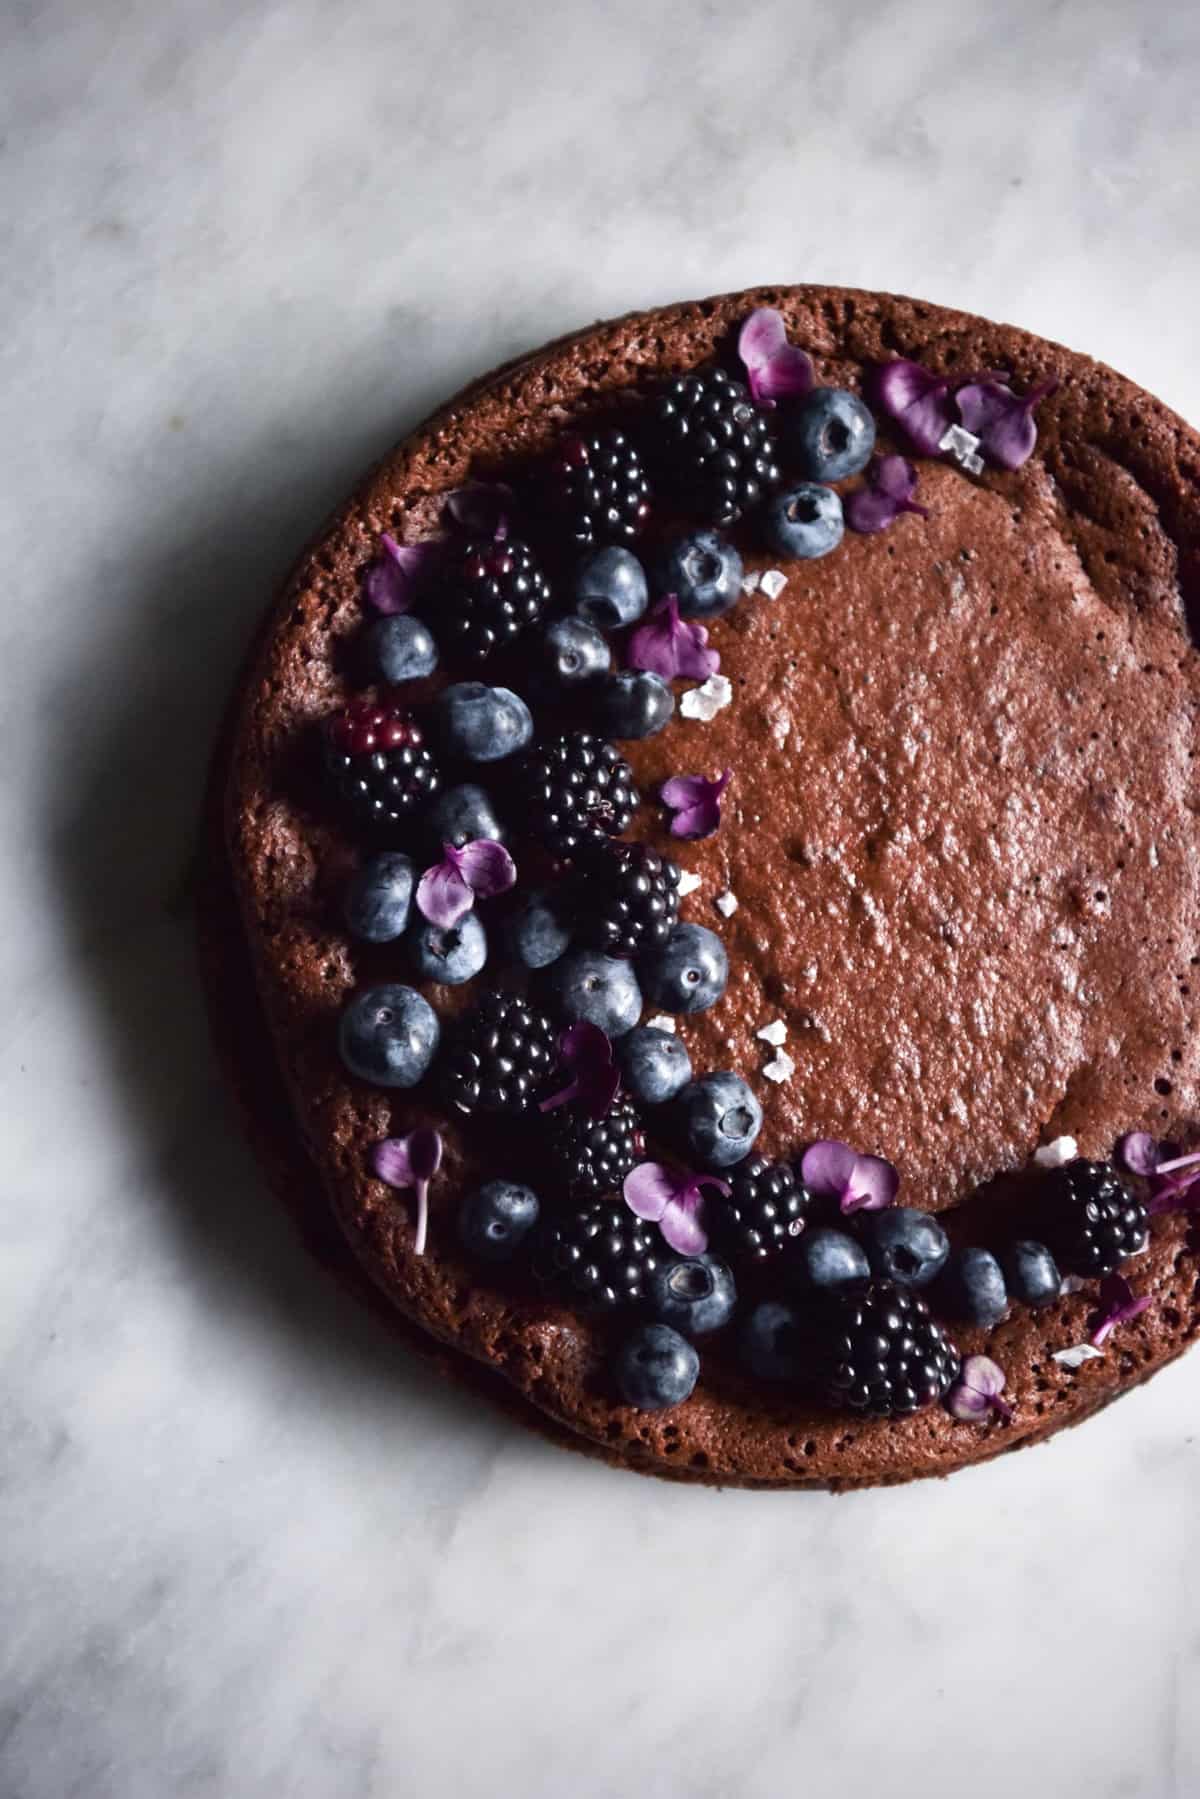 An aerial image of a flourless chocolate cake atop a white marble table. The cake is decorated with a crescent moon shape design of blueberries, blackberries and purple edible flowers.